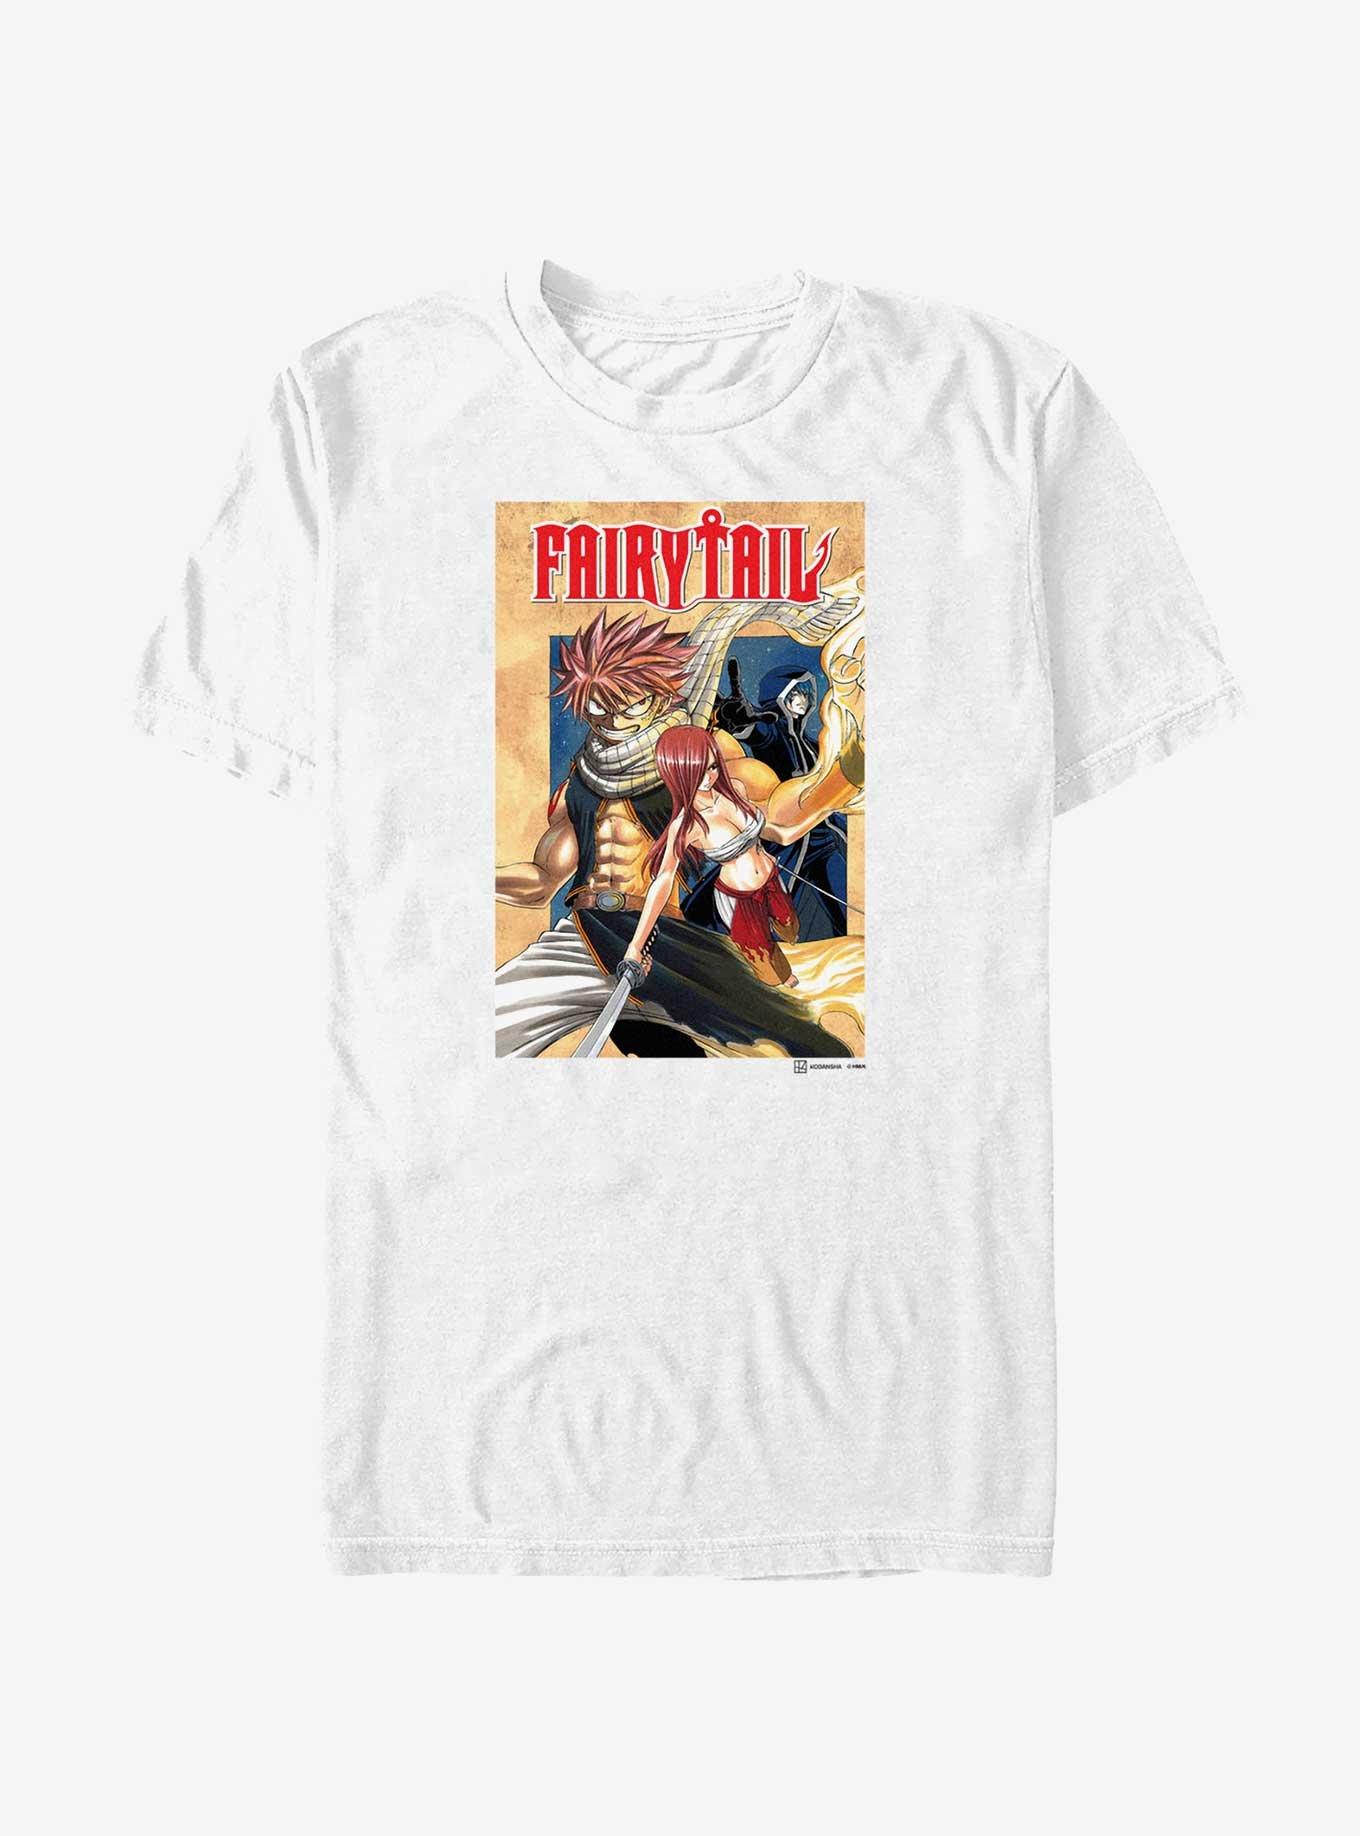 Fairy Tail Cover T-Shirt